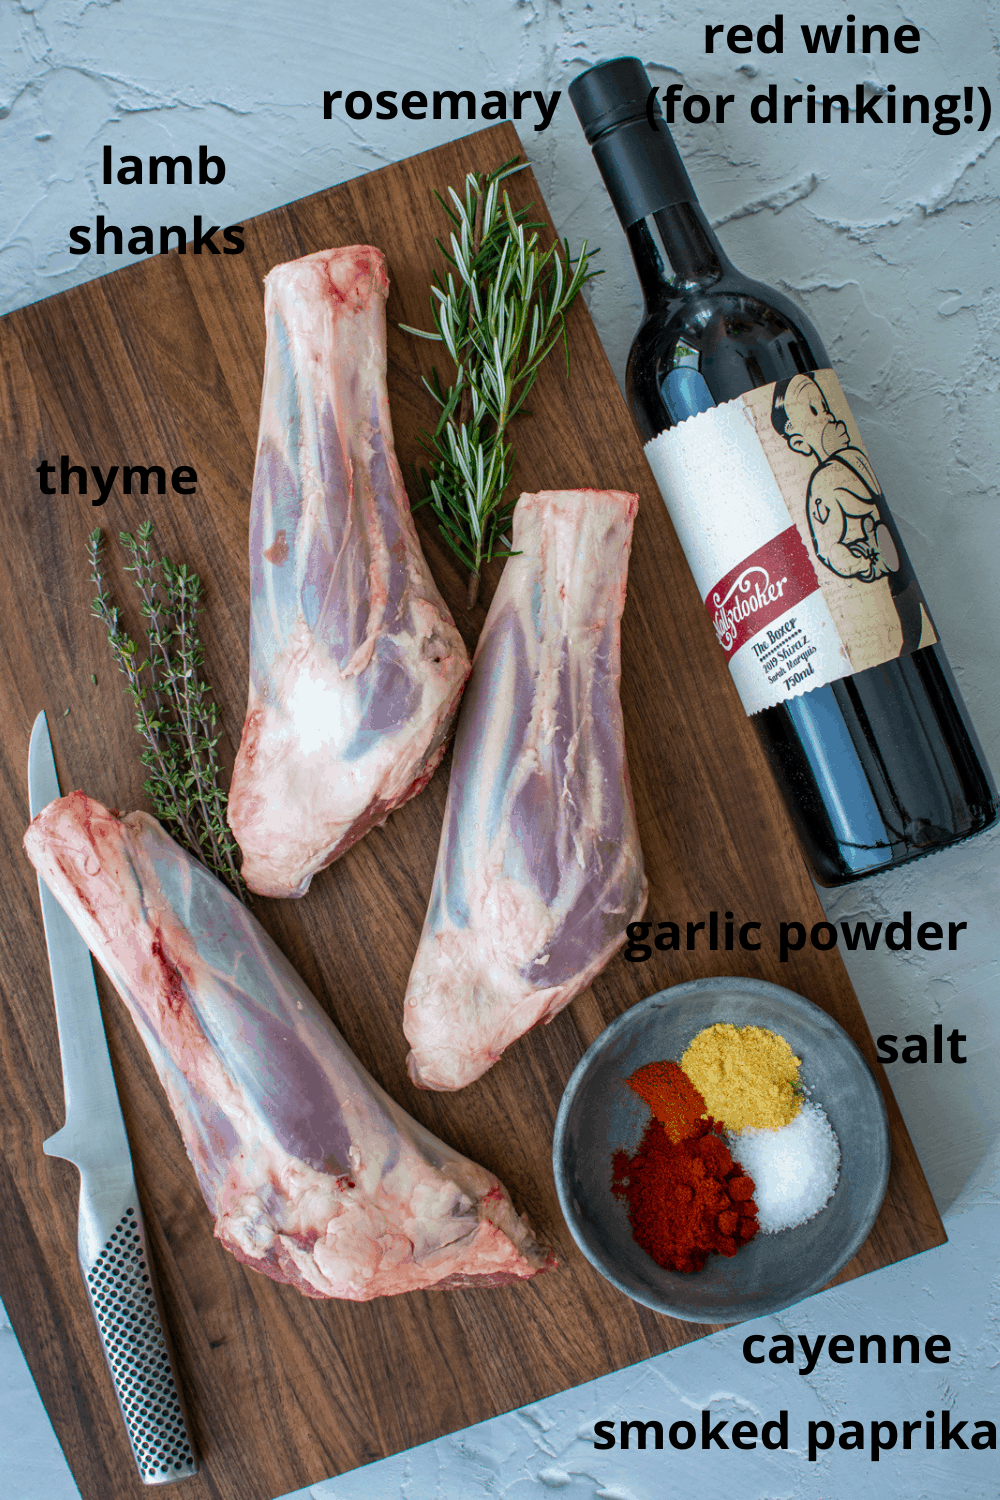 lamb shanks on a chopping board with spices, herbs and a bottle of wine